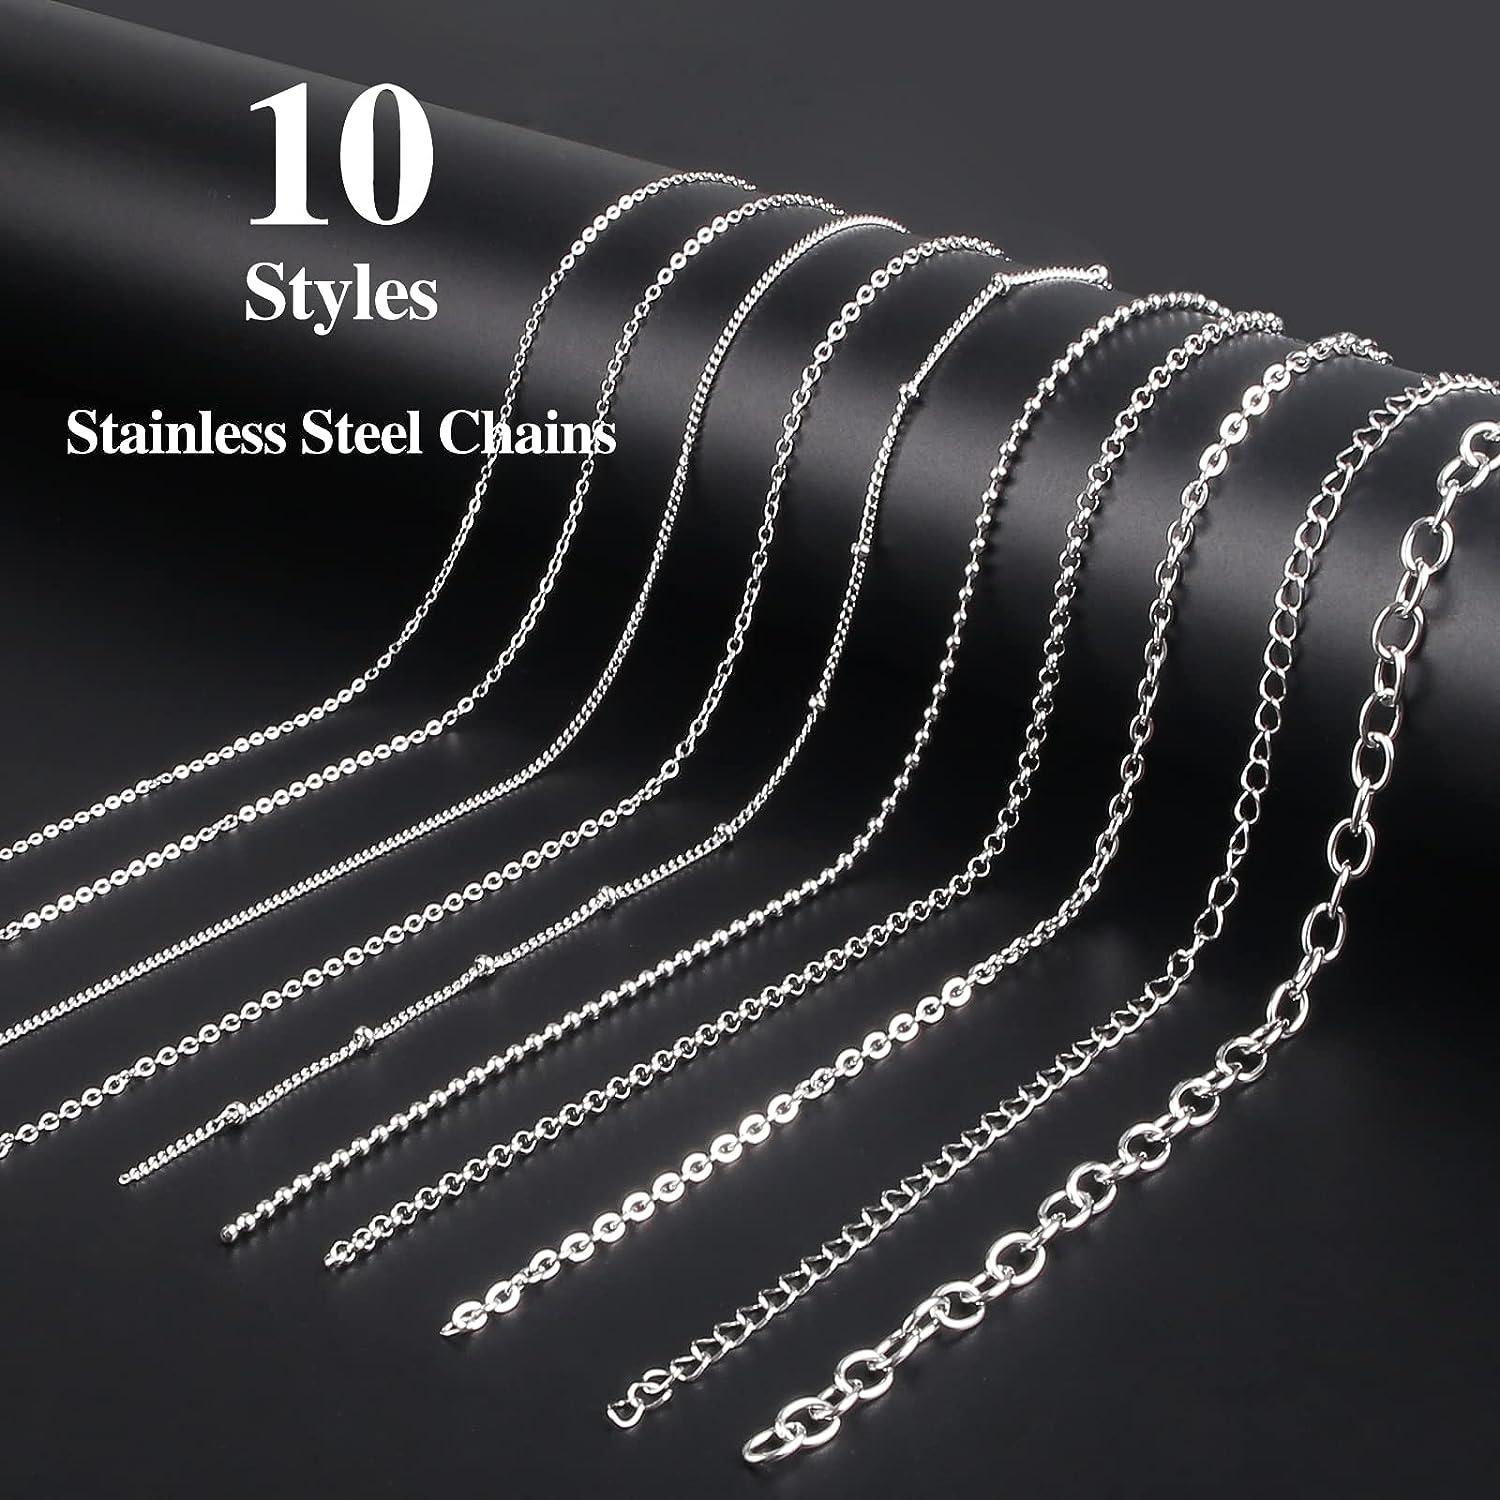 Ecoofor Necklace Chains for Jewelry Making, 78.7 Feet 10 Rolls 304  Stainless Steel Jewelry Chains for DIY Necklace Bracelet Jewelry Making  with Stainless Steel Jump Rings/Lobster Clasps/Connectors